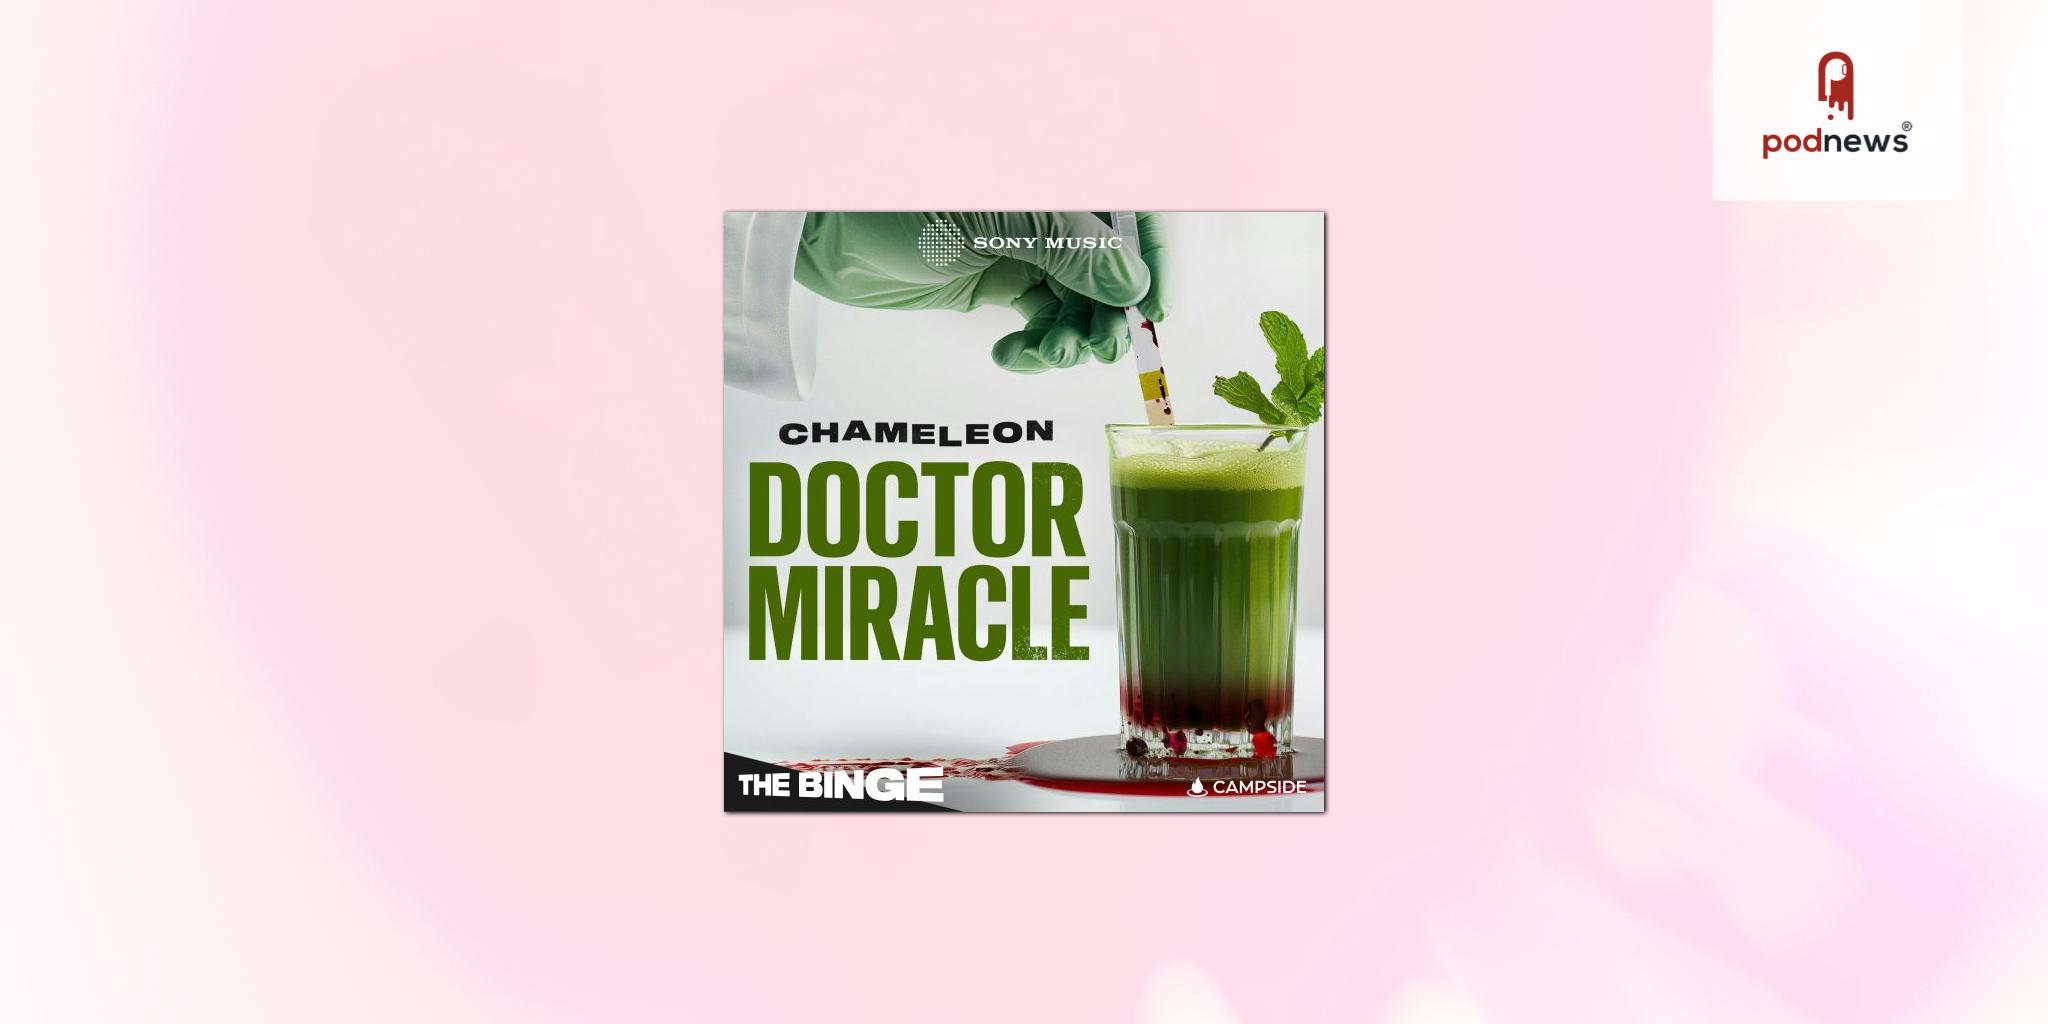 Dr Miracle - the new season of Chameleon that examines a deadly alkaline diet